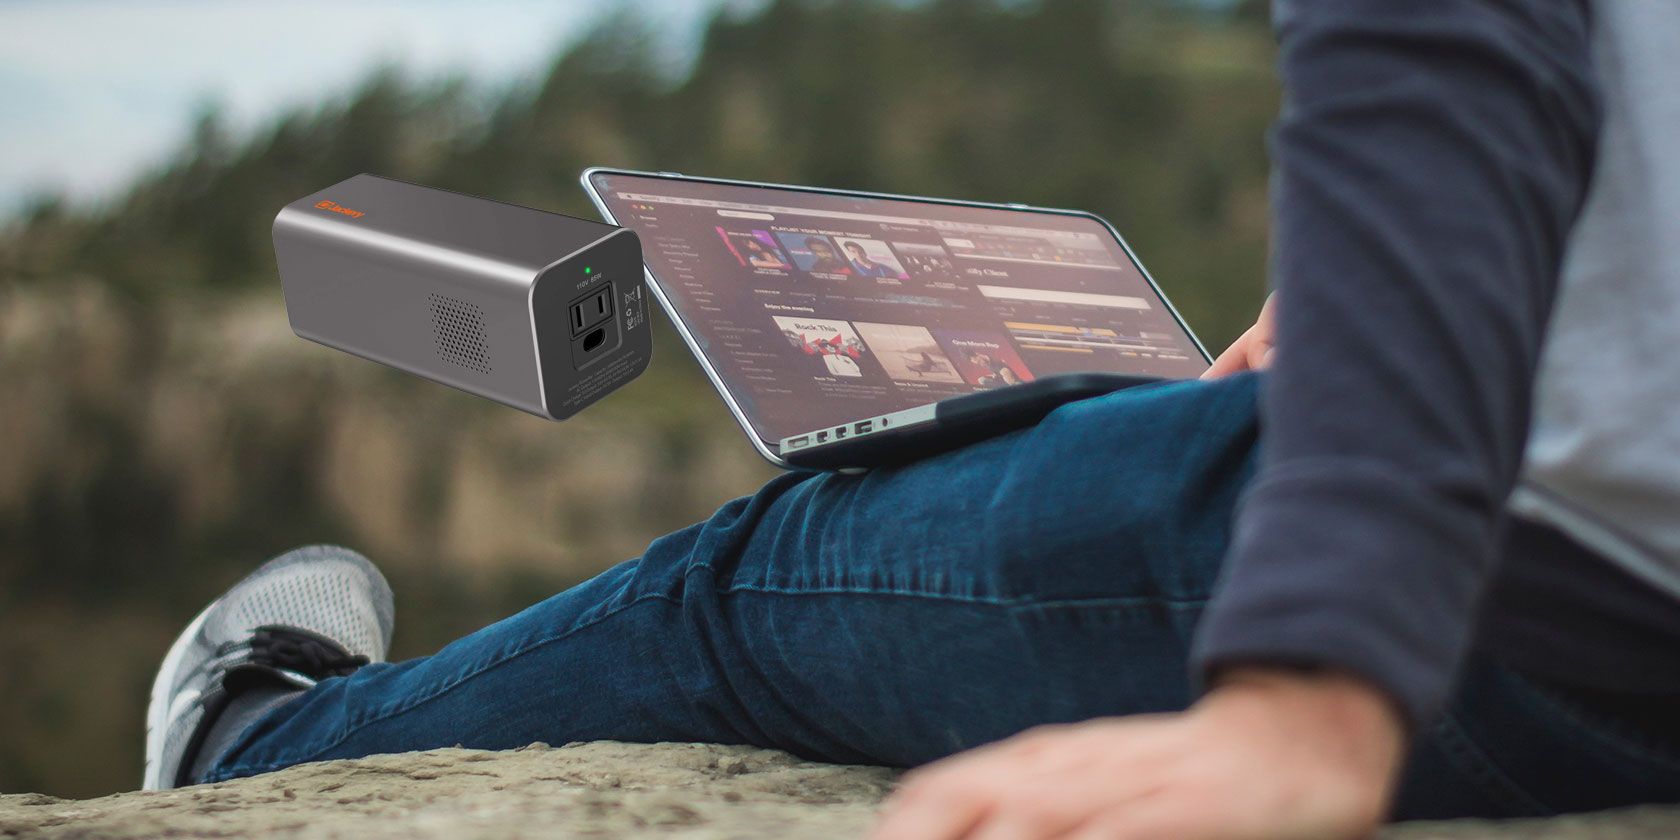 The 6 Best Laptop Power Banks to Recharge Your Computer Anywhere